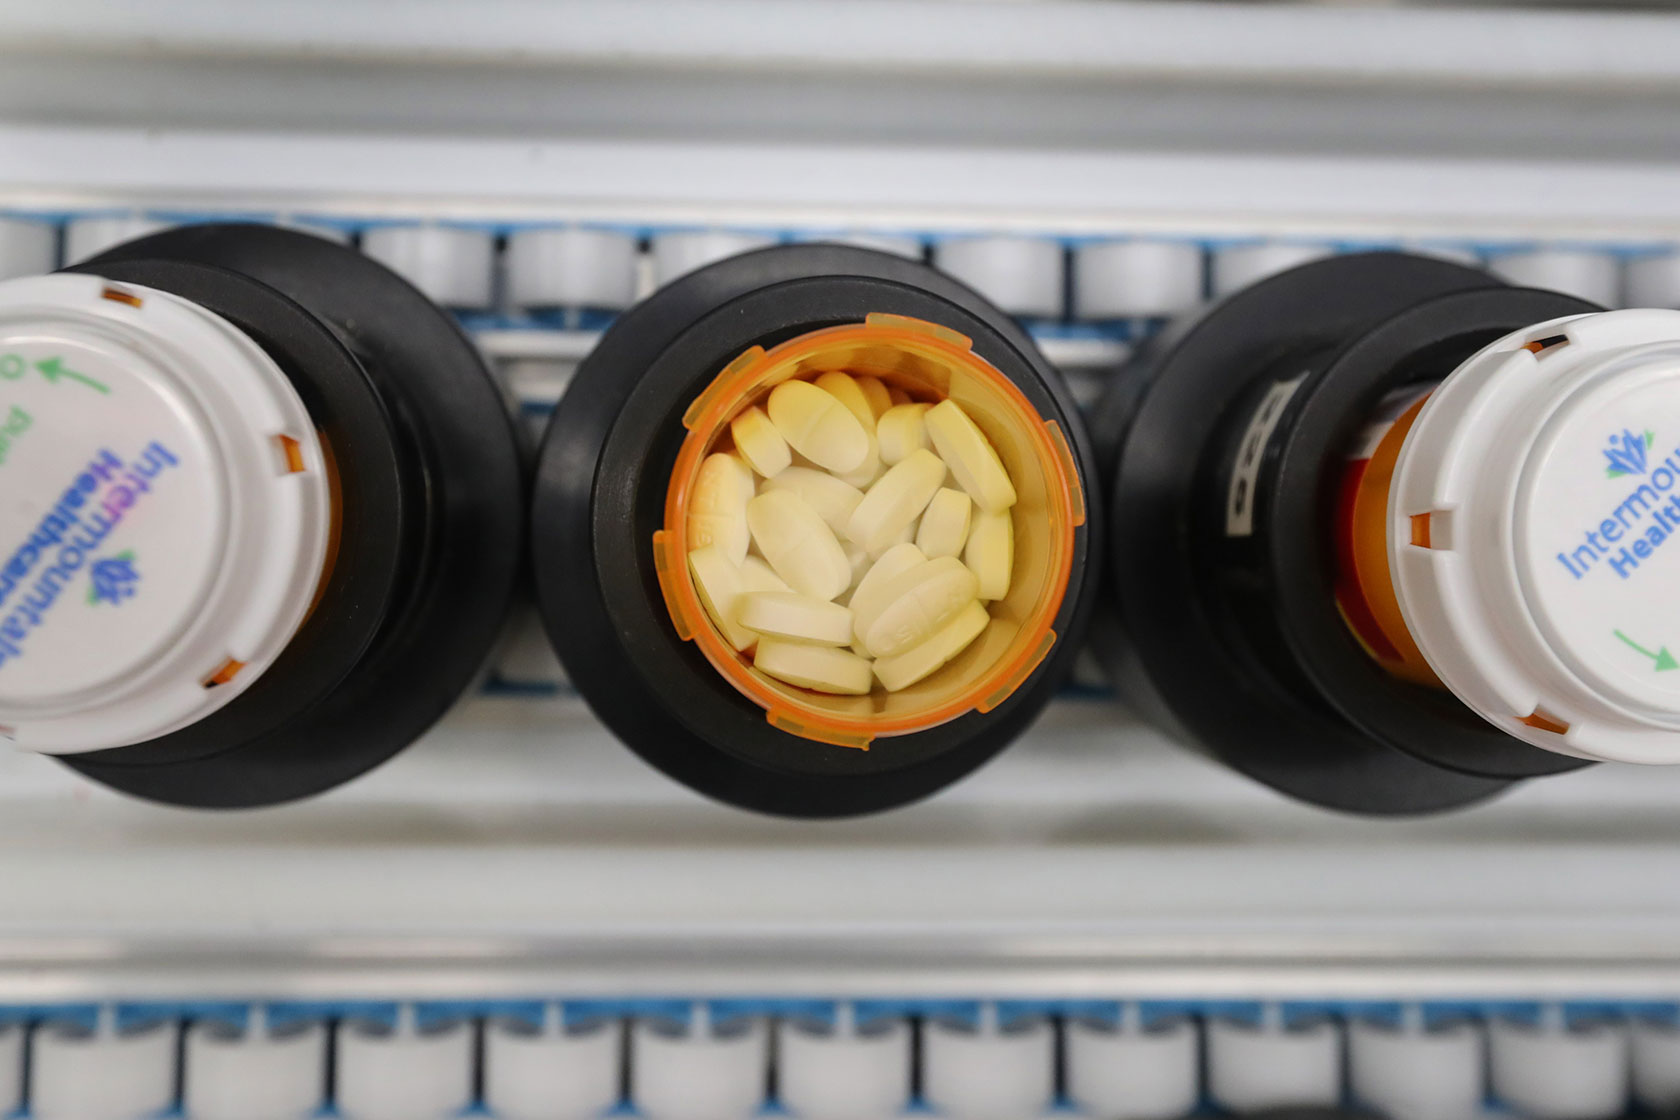 Photo shows three orange prescription drug bottles—one full with the cap off, and two next to it with the caps screwed on—on an assembly line